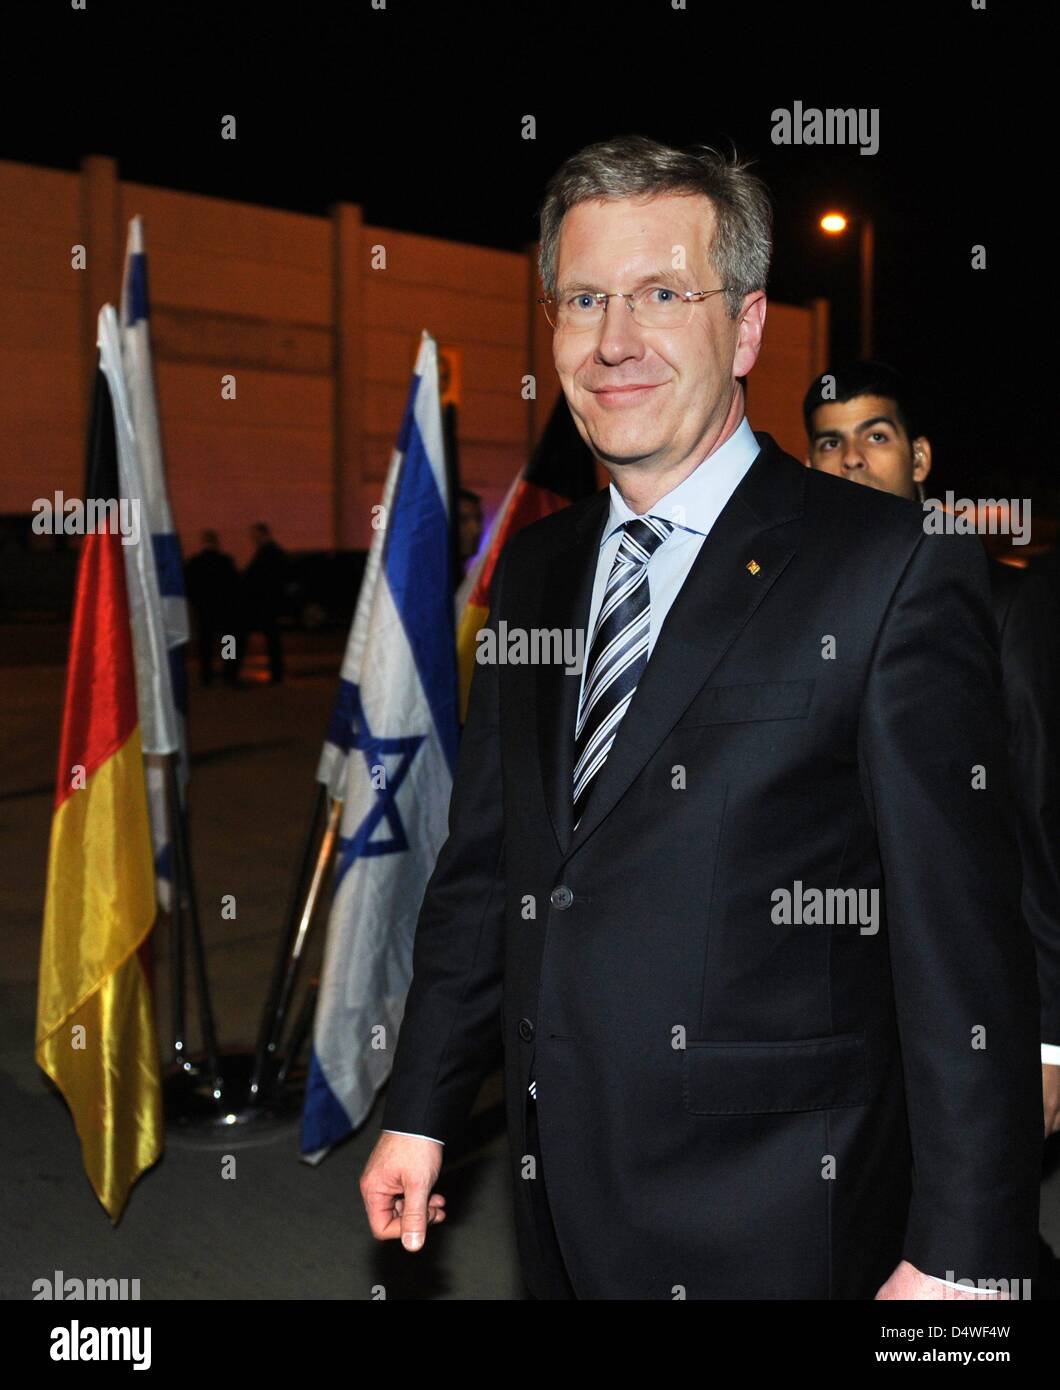 German President Christian Wulff walks past German and Israeli flags after arriving with daughter Annalena in Tel Aviv, Israel, 27 November 2010. Wulff's 17-year-old daughter accompanies Mr Wulff on his four-day visit to Israel in stead of his wife Bettina. The choice of travel companion is supposed to symbolize the importance of transmitting the memory of the Holocaust to younger  Stock Photo